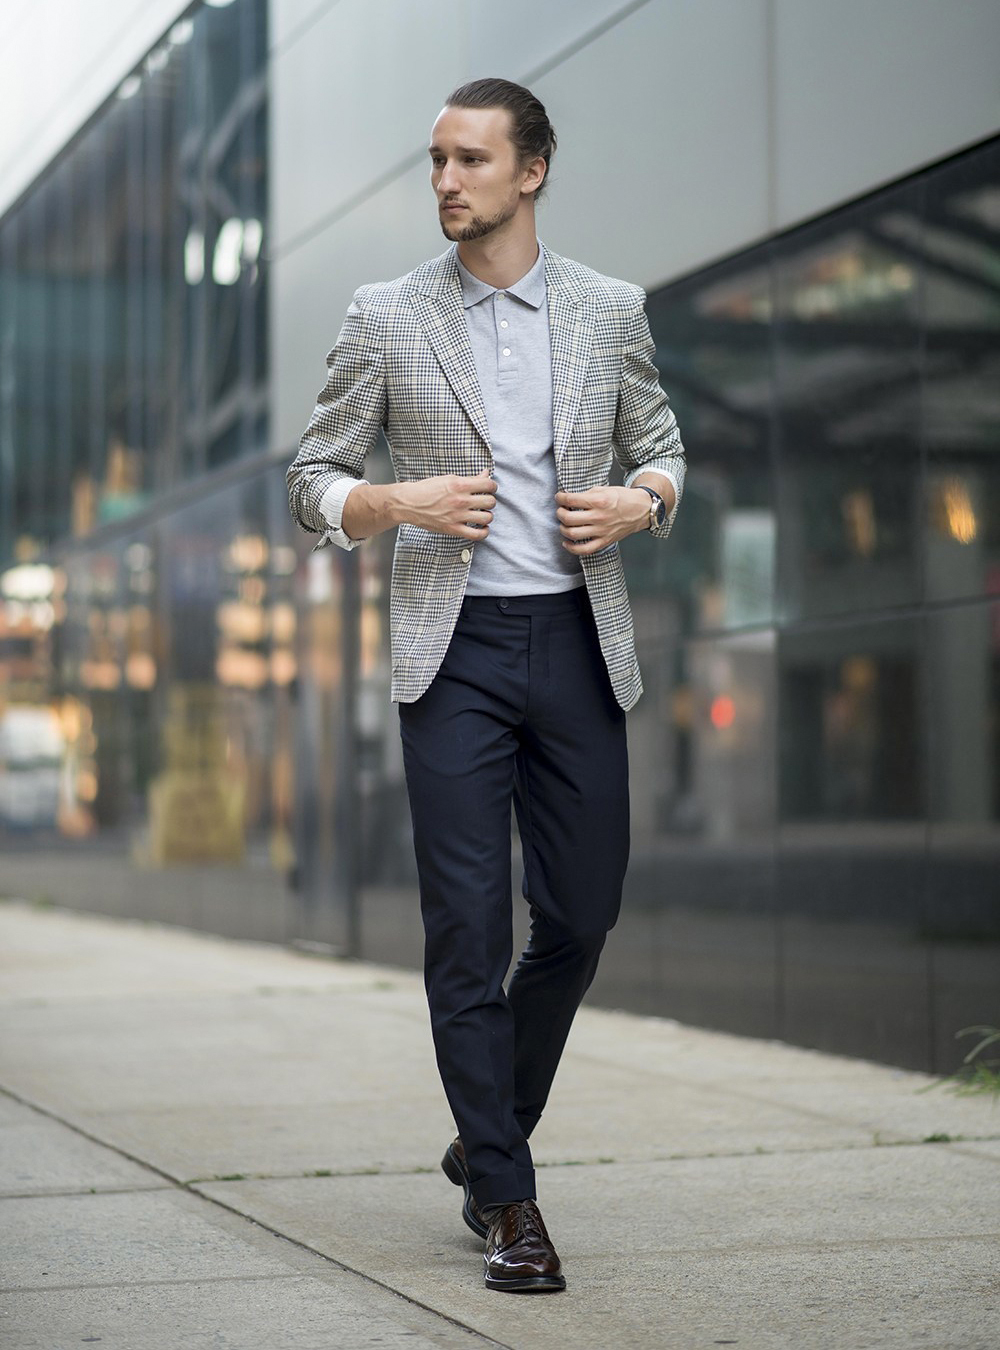 Young Businessman Street Fashion in New York City Stock Image - Image of  outdoor, outside: 181216933